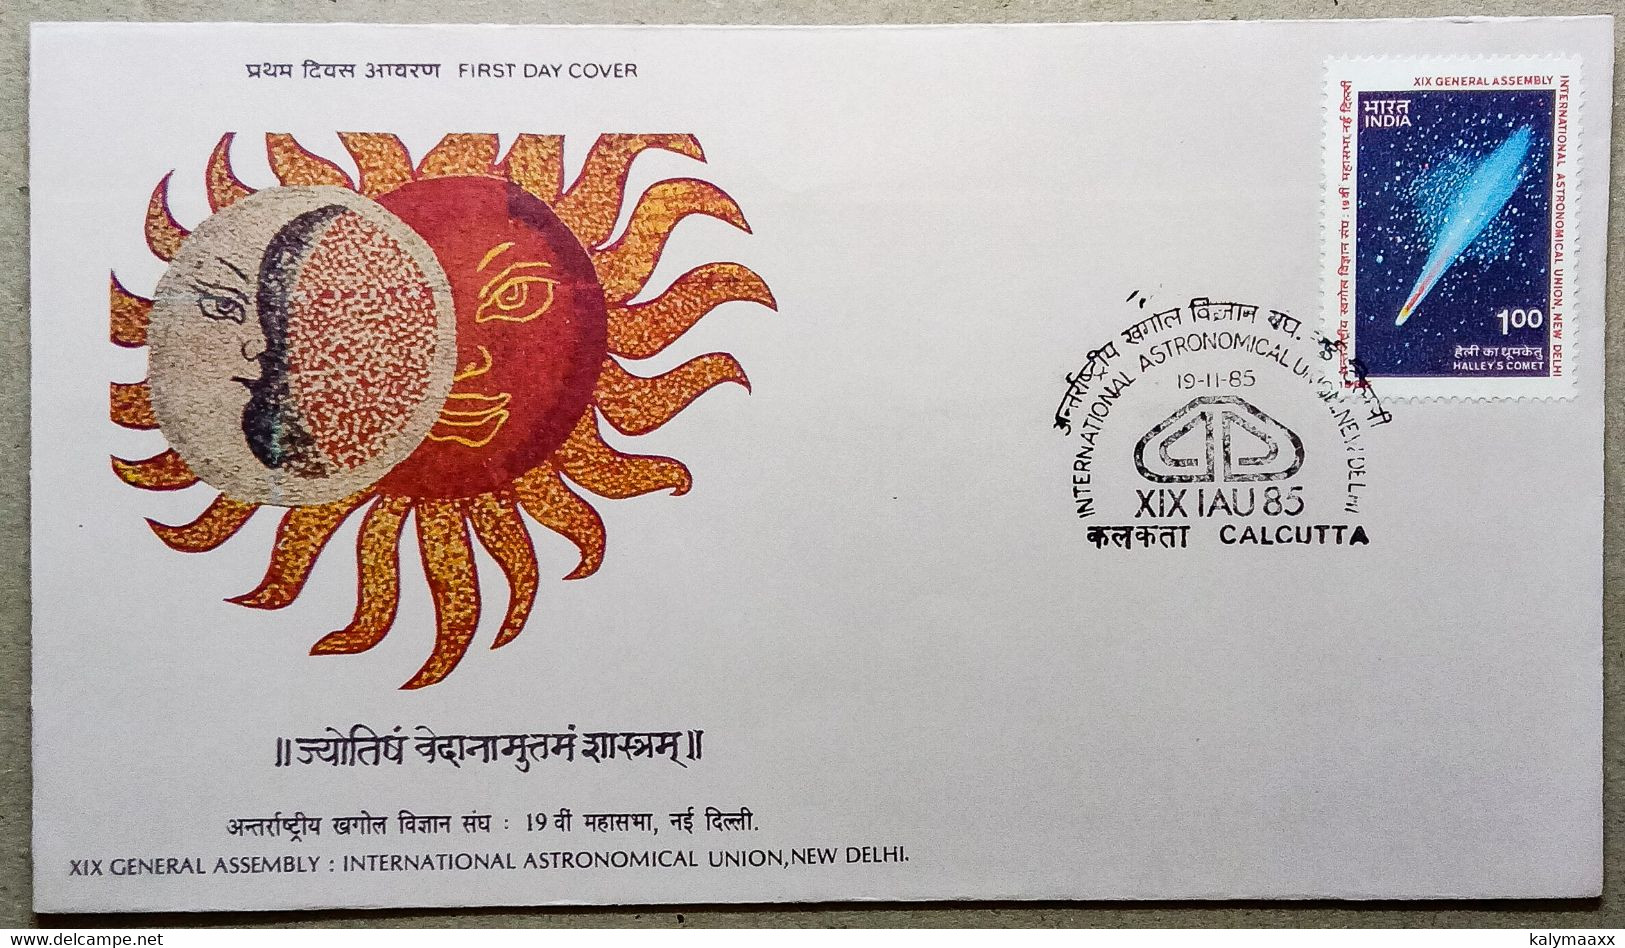 INDIA 1985 HALLEY'S COMET, INTERNATIONAL ASTRONOMICAL UNION, SPACE, SCIENCE, COMET, SUN, MOON....FDC - Asia